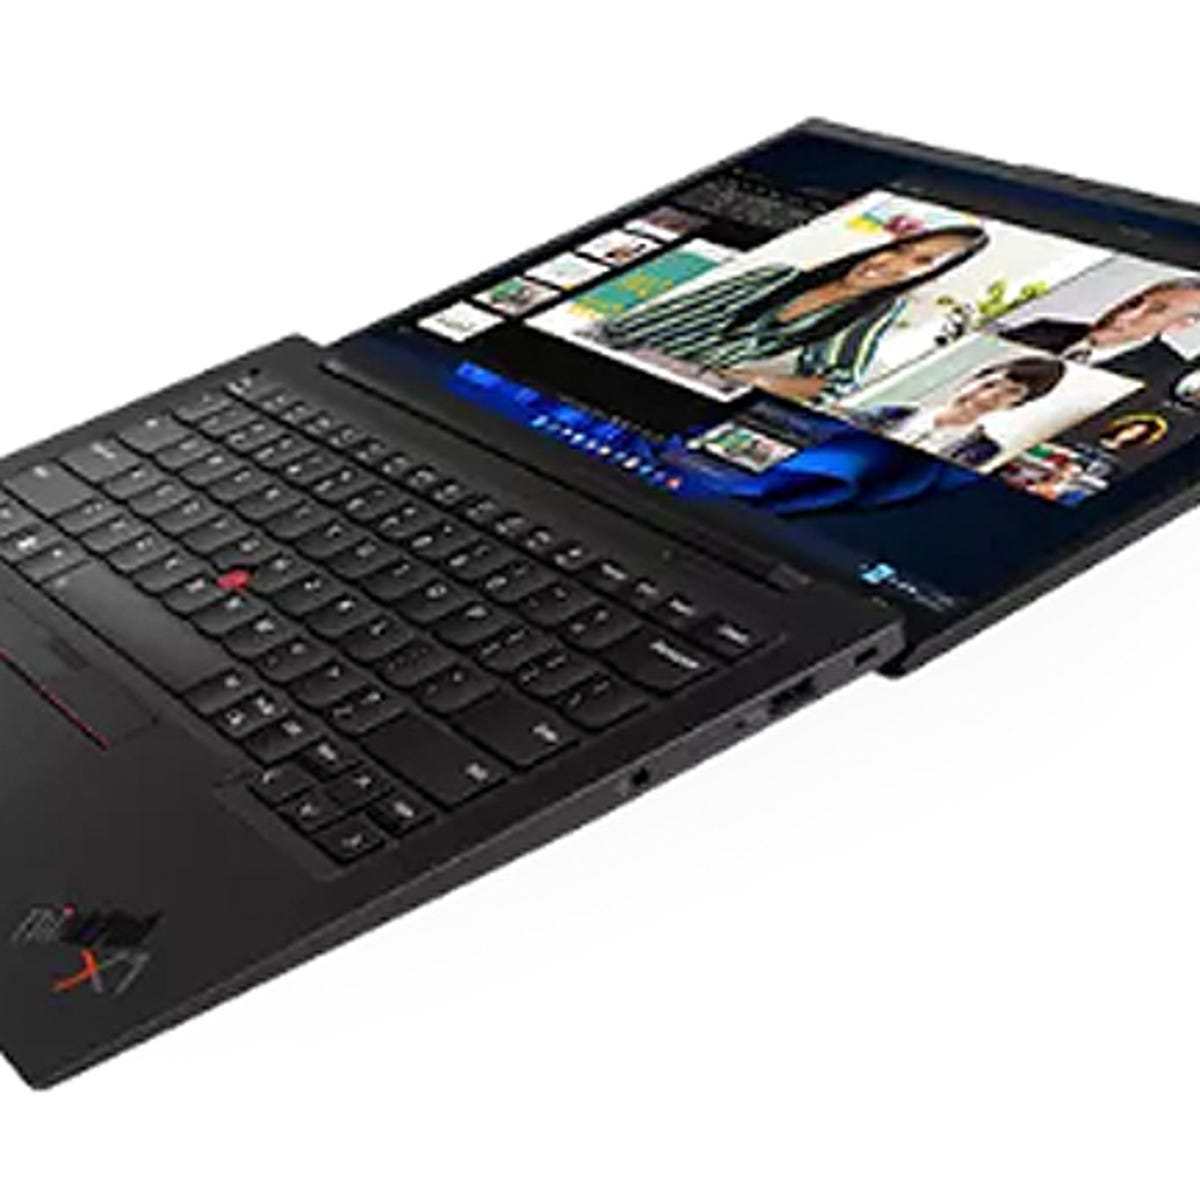 Best Linux For Thinkpad Lenovo ThinkPad X1 Carbon (Gen 10) review: The best business laptop? | ZDNET